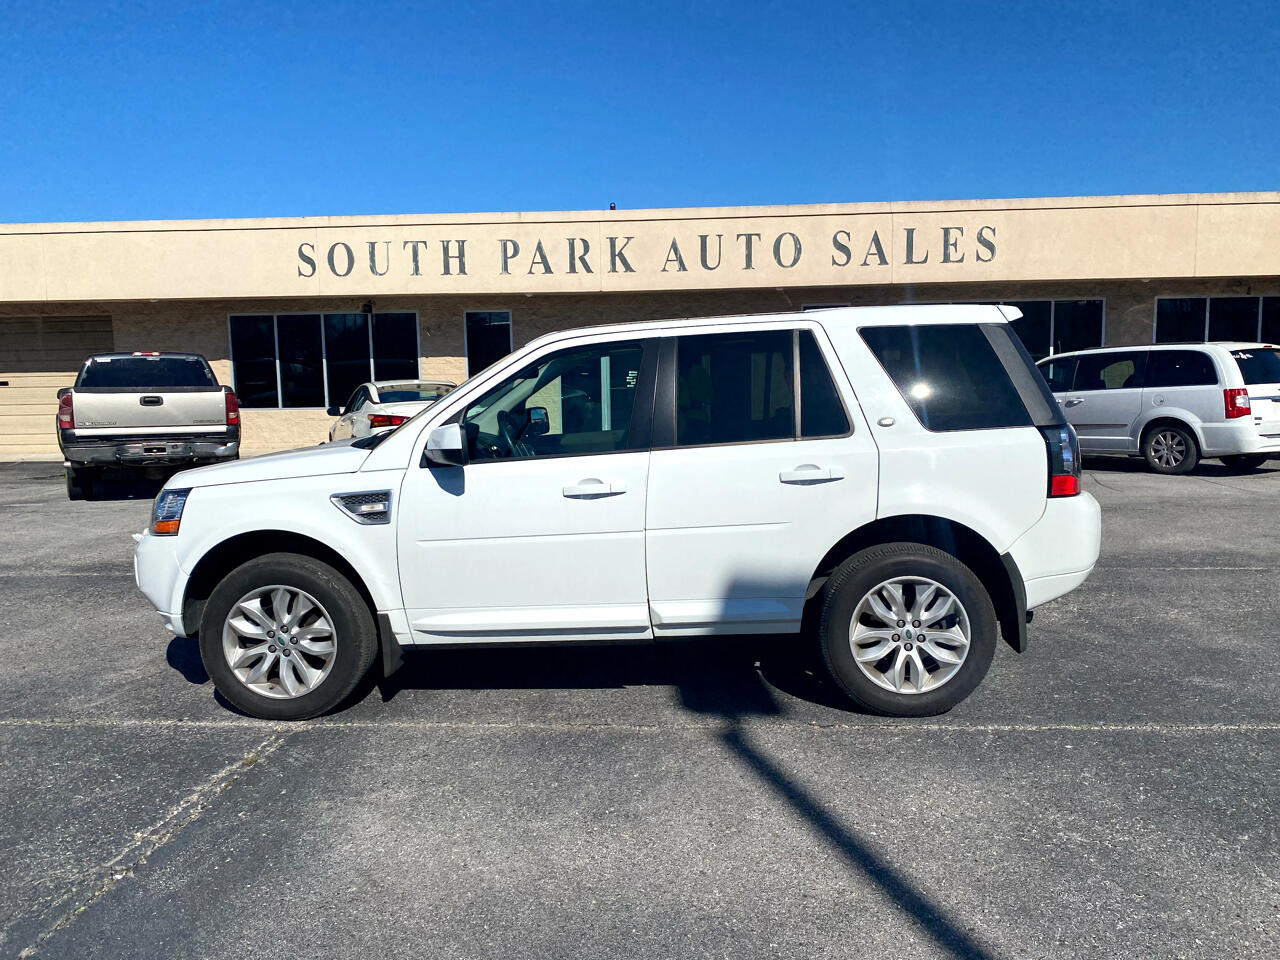 Used 2013 Land Rover LR2 HSE for Sale in Cullman AL 35055 South Park Auto  Sales